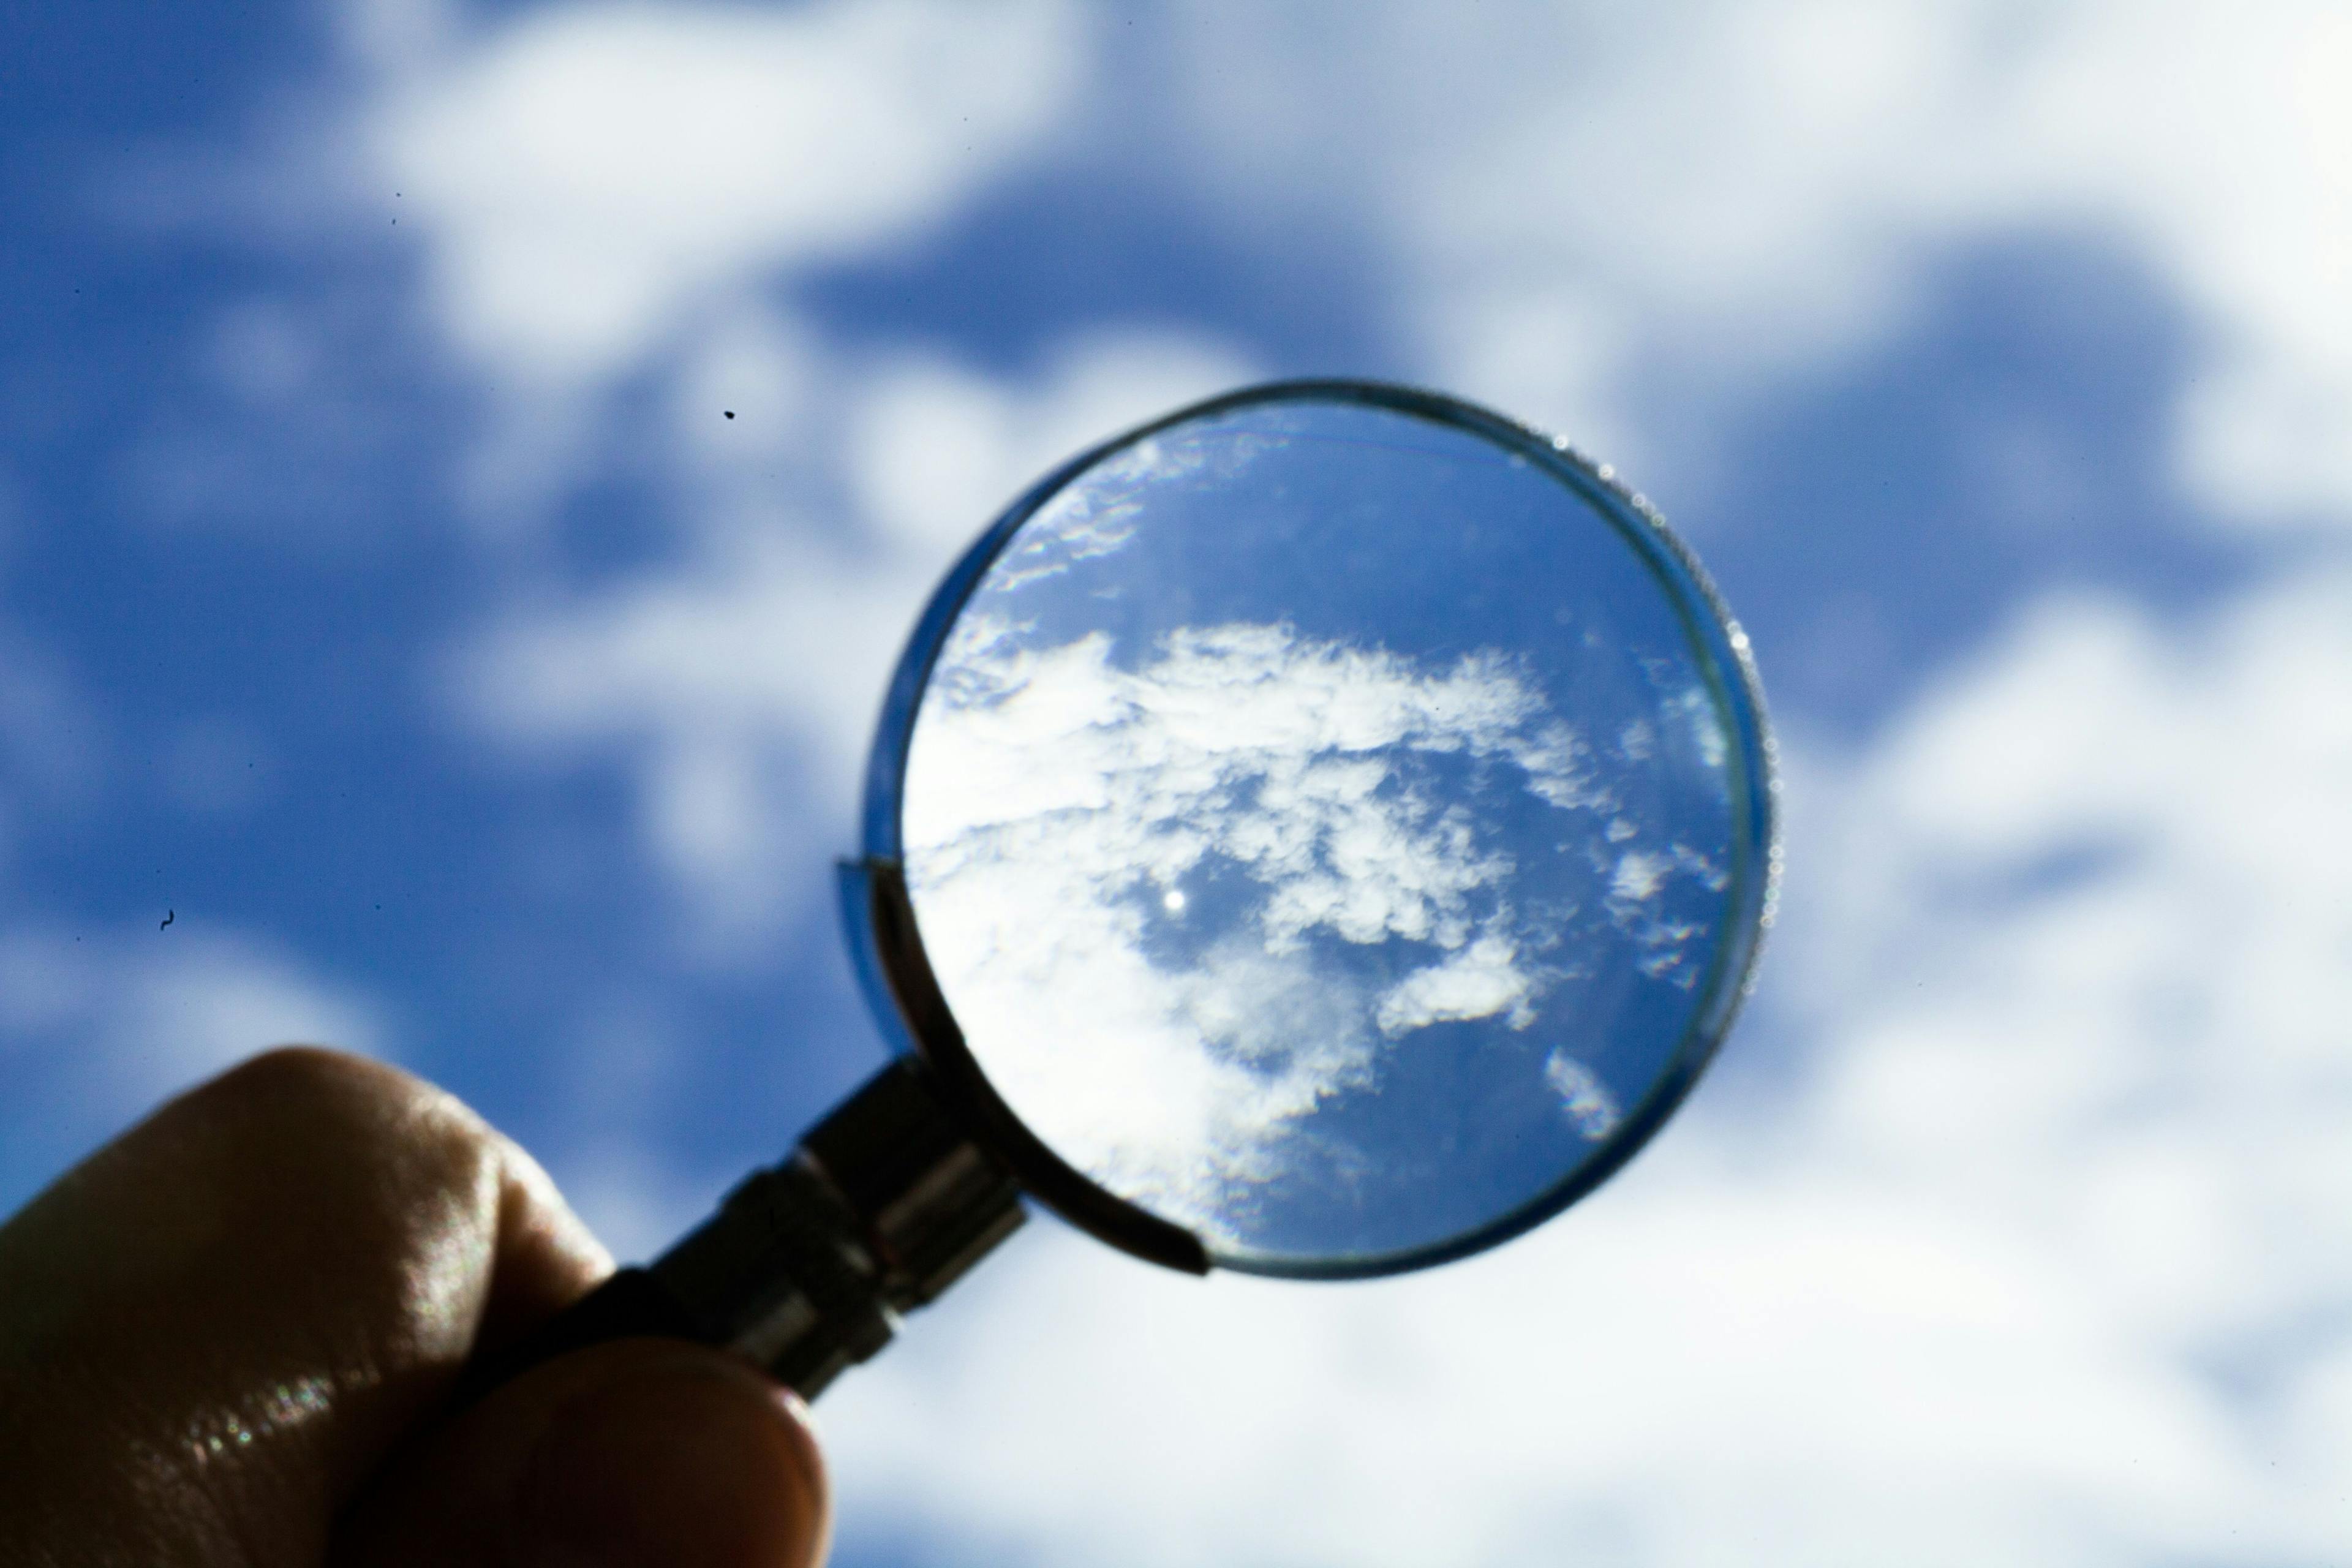 magnifying glass held up to sky for clear vision of clouds